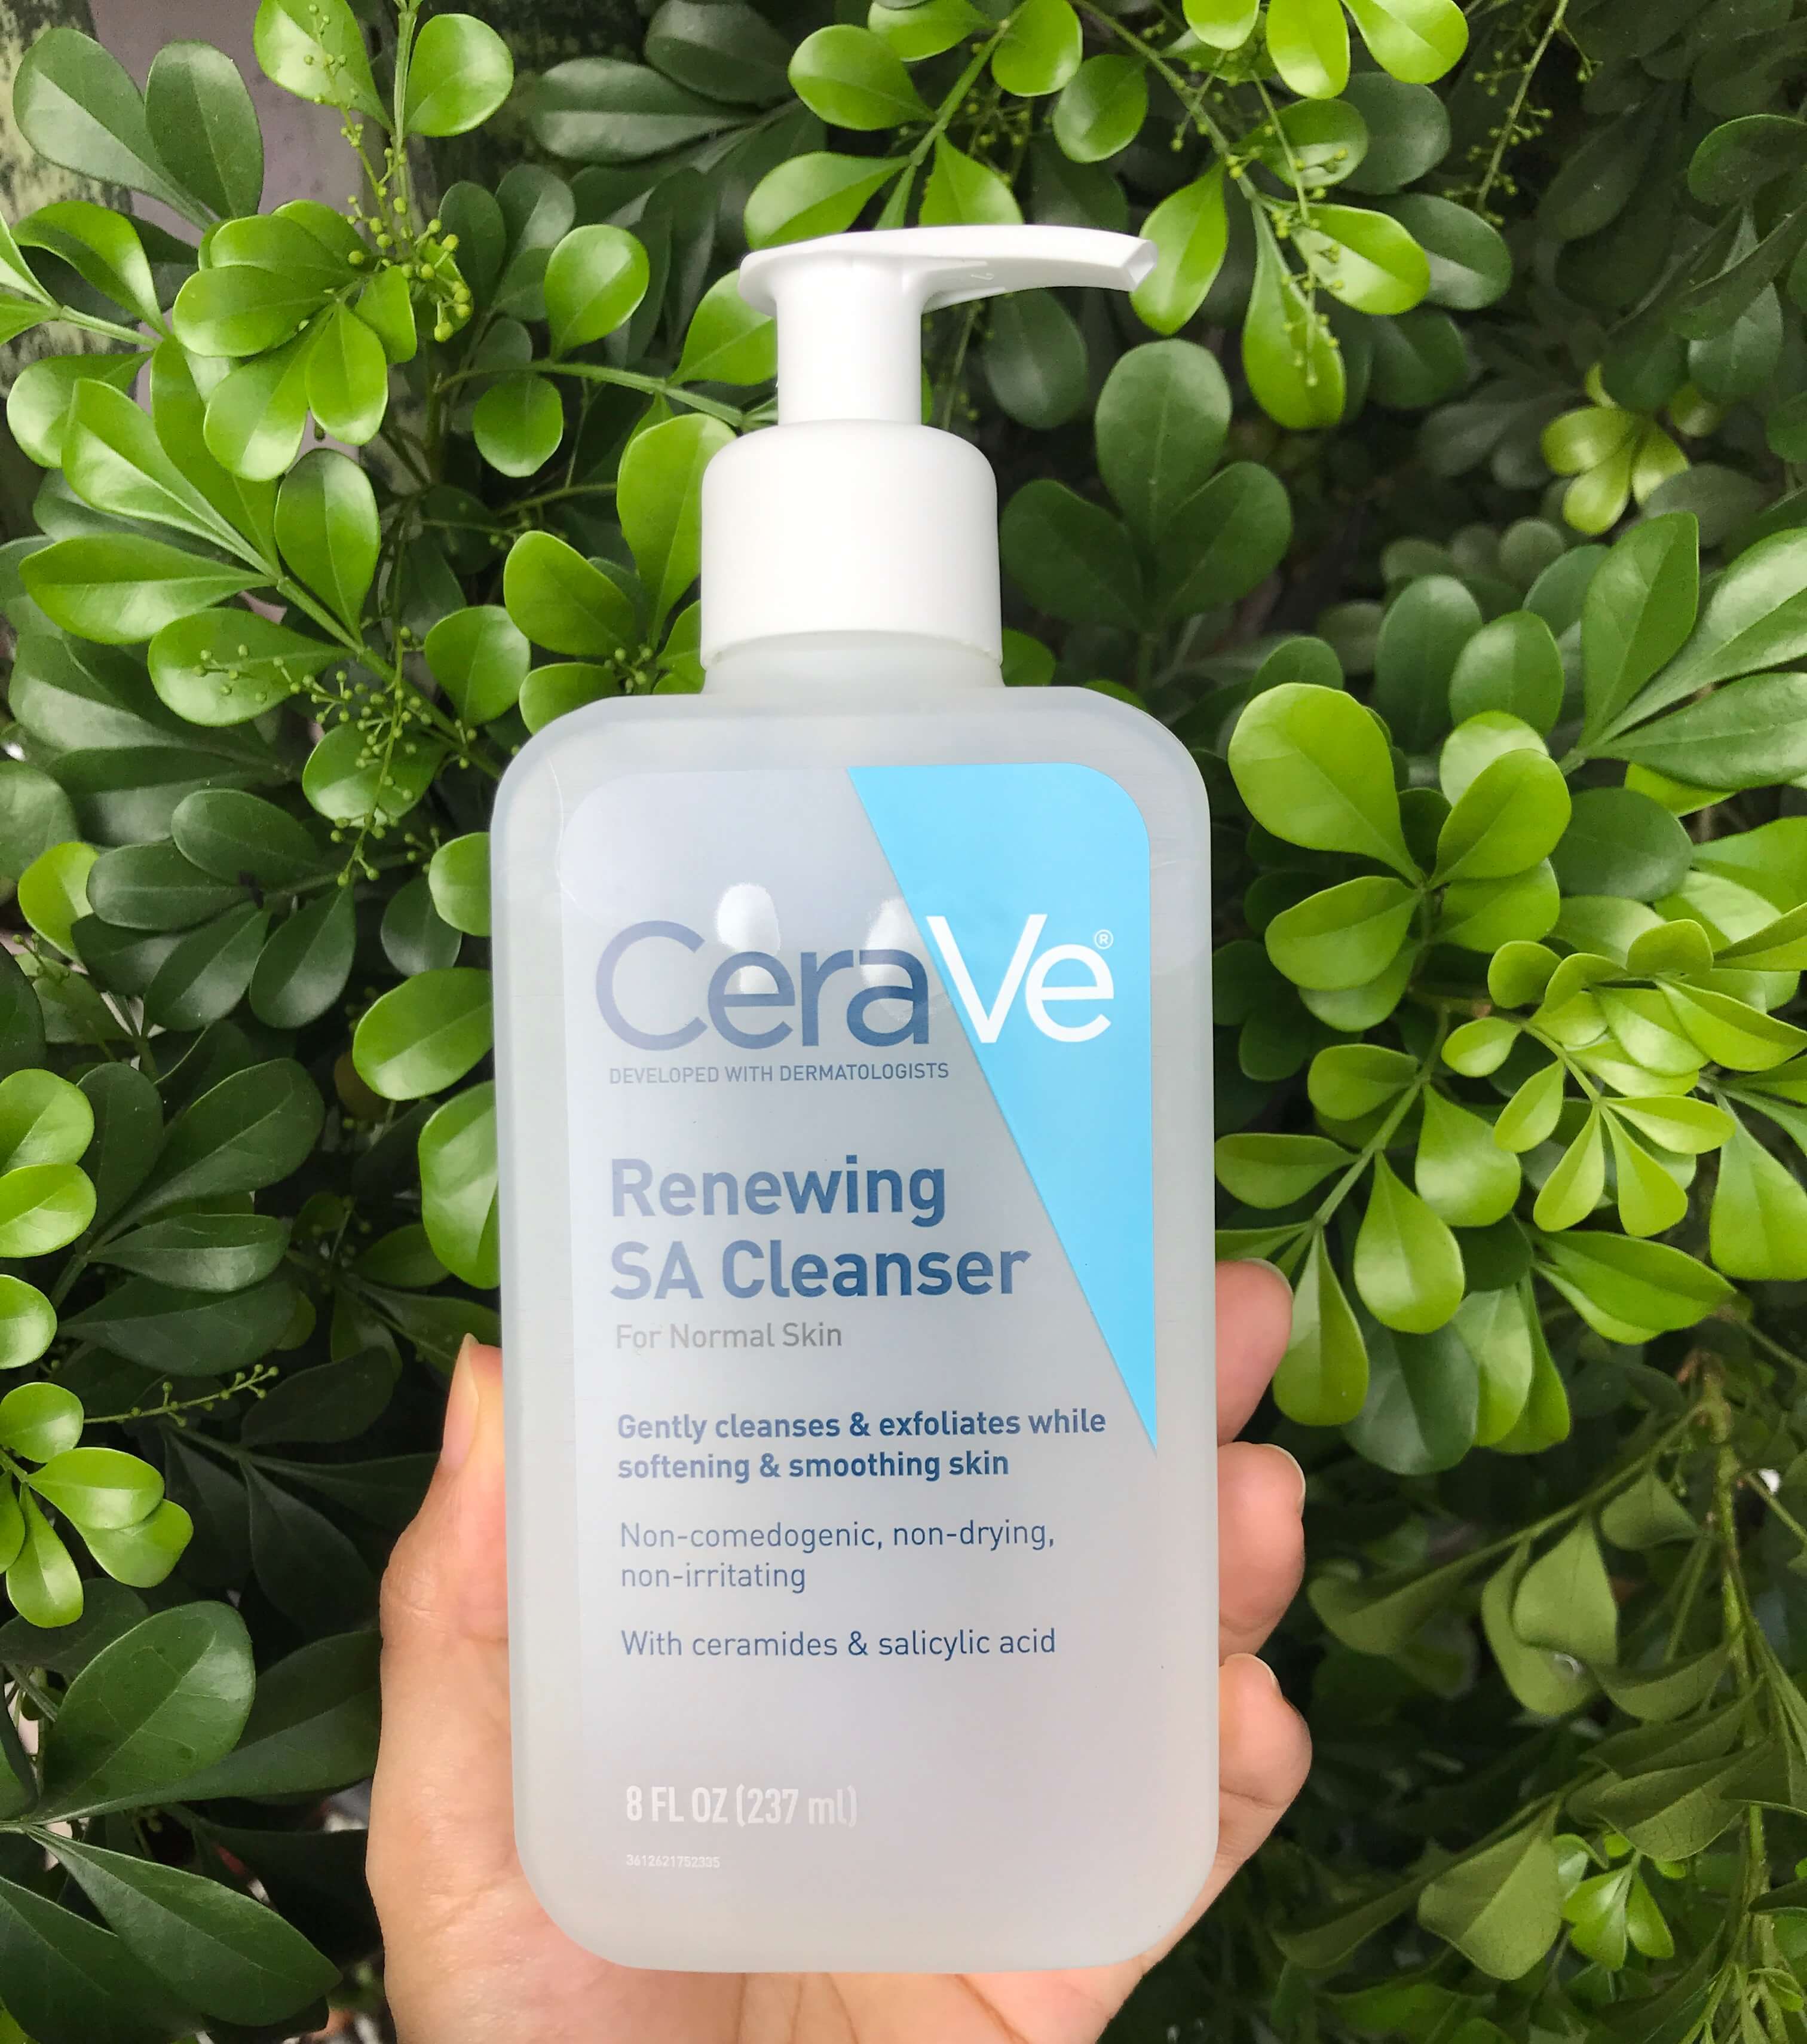 Smoothing cleanser. CERAVE Smoothing Cleanser. Цераве sa Smoothing Cleanser. CERAVE sa Smoothing Cleanser sa limpiador. CERAVE Hydrating Cleanser in Korea.